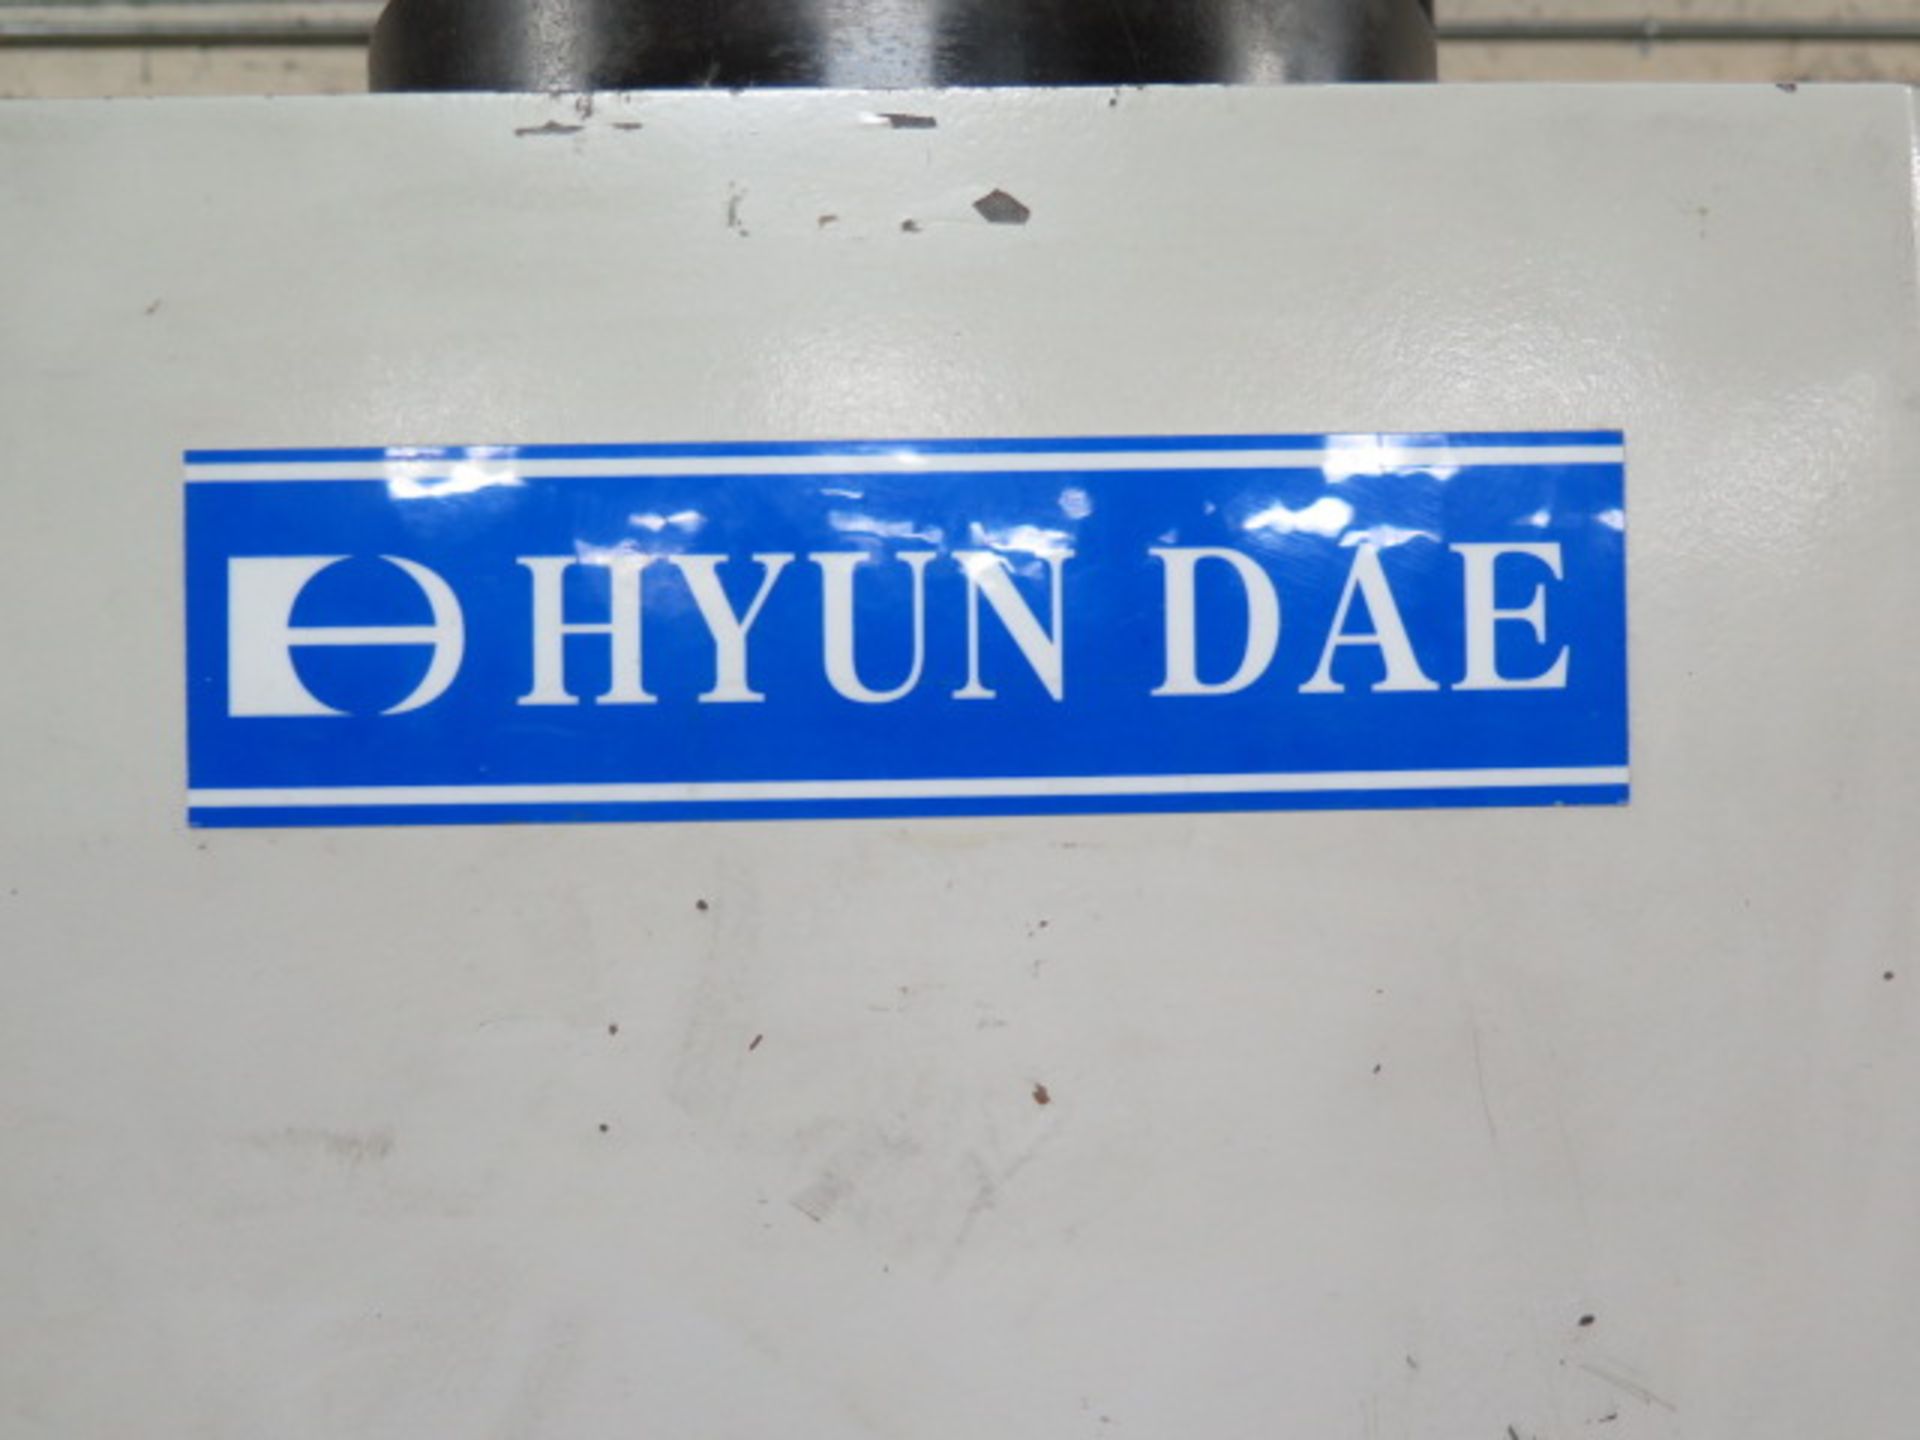 2002 Hyun Dae HHP-20 20 Ton Bench-Type Hyd Press s/n 09-245-2 w/ 15.75” Open Height, SOLD AS IS - Image 8 of 8